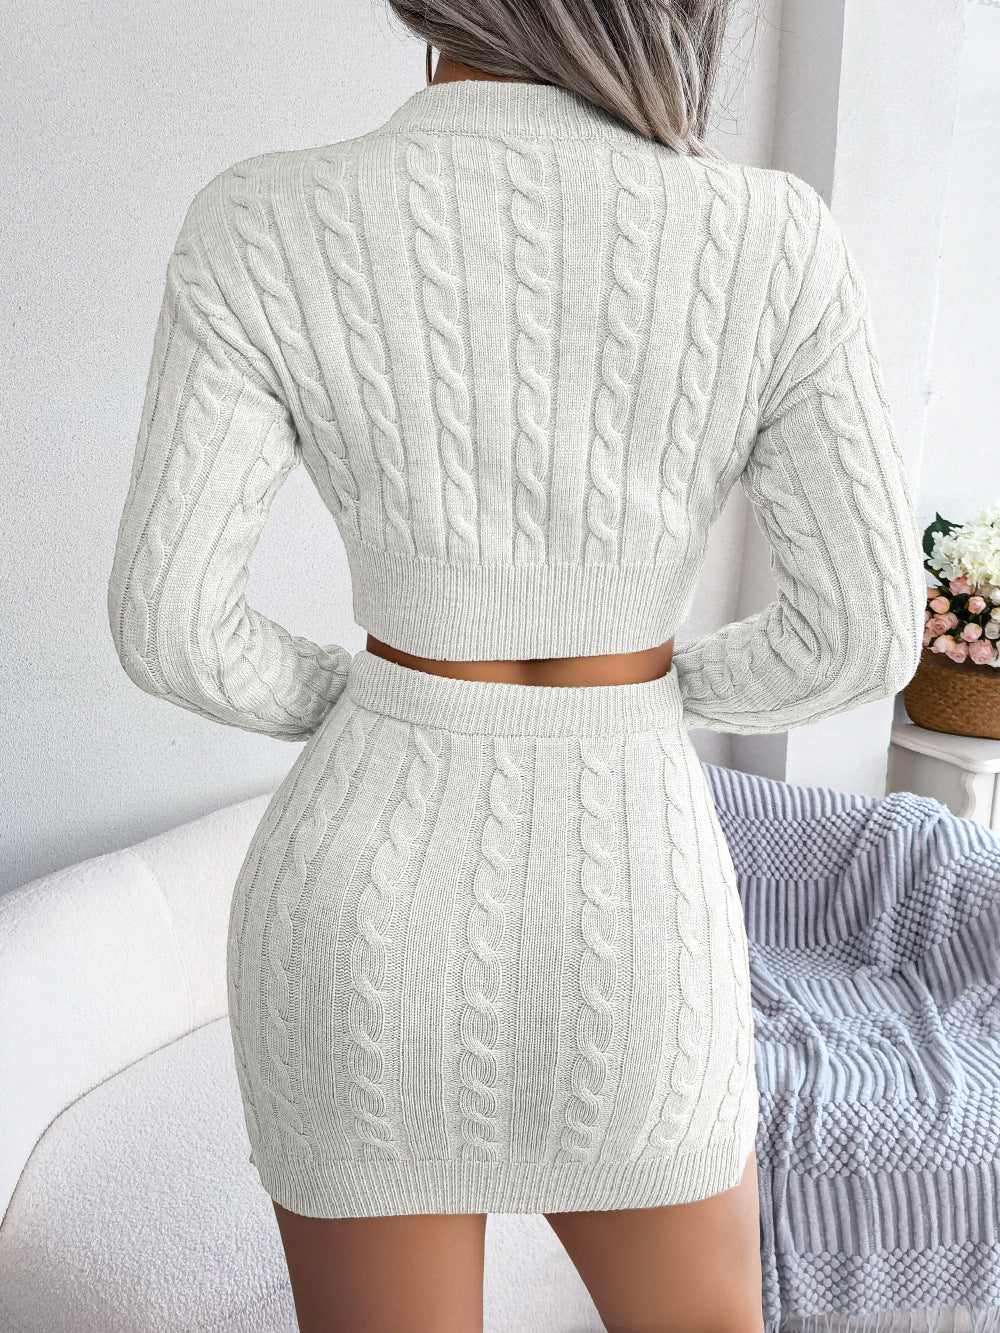 Two Piece Long Sleeve O-Neck Knitted Crop Top and Mini Skirt Set